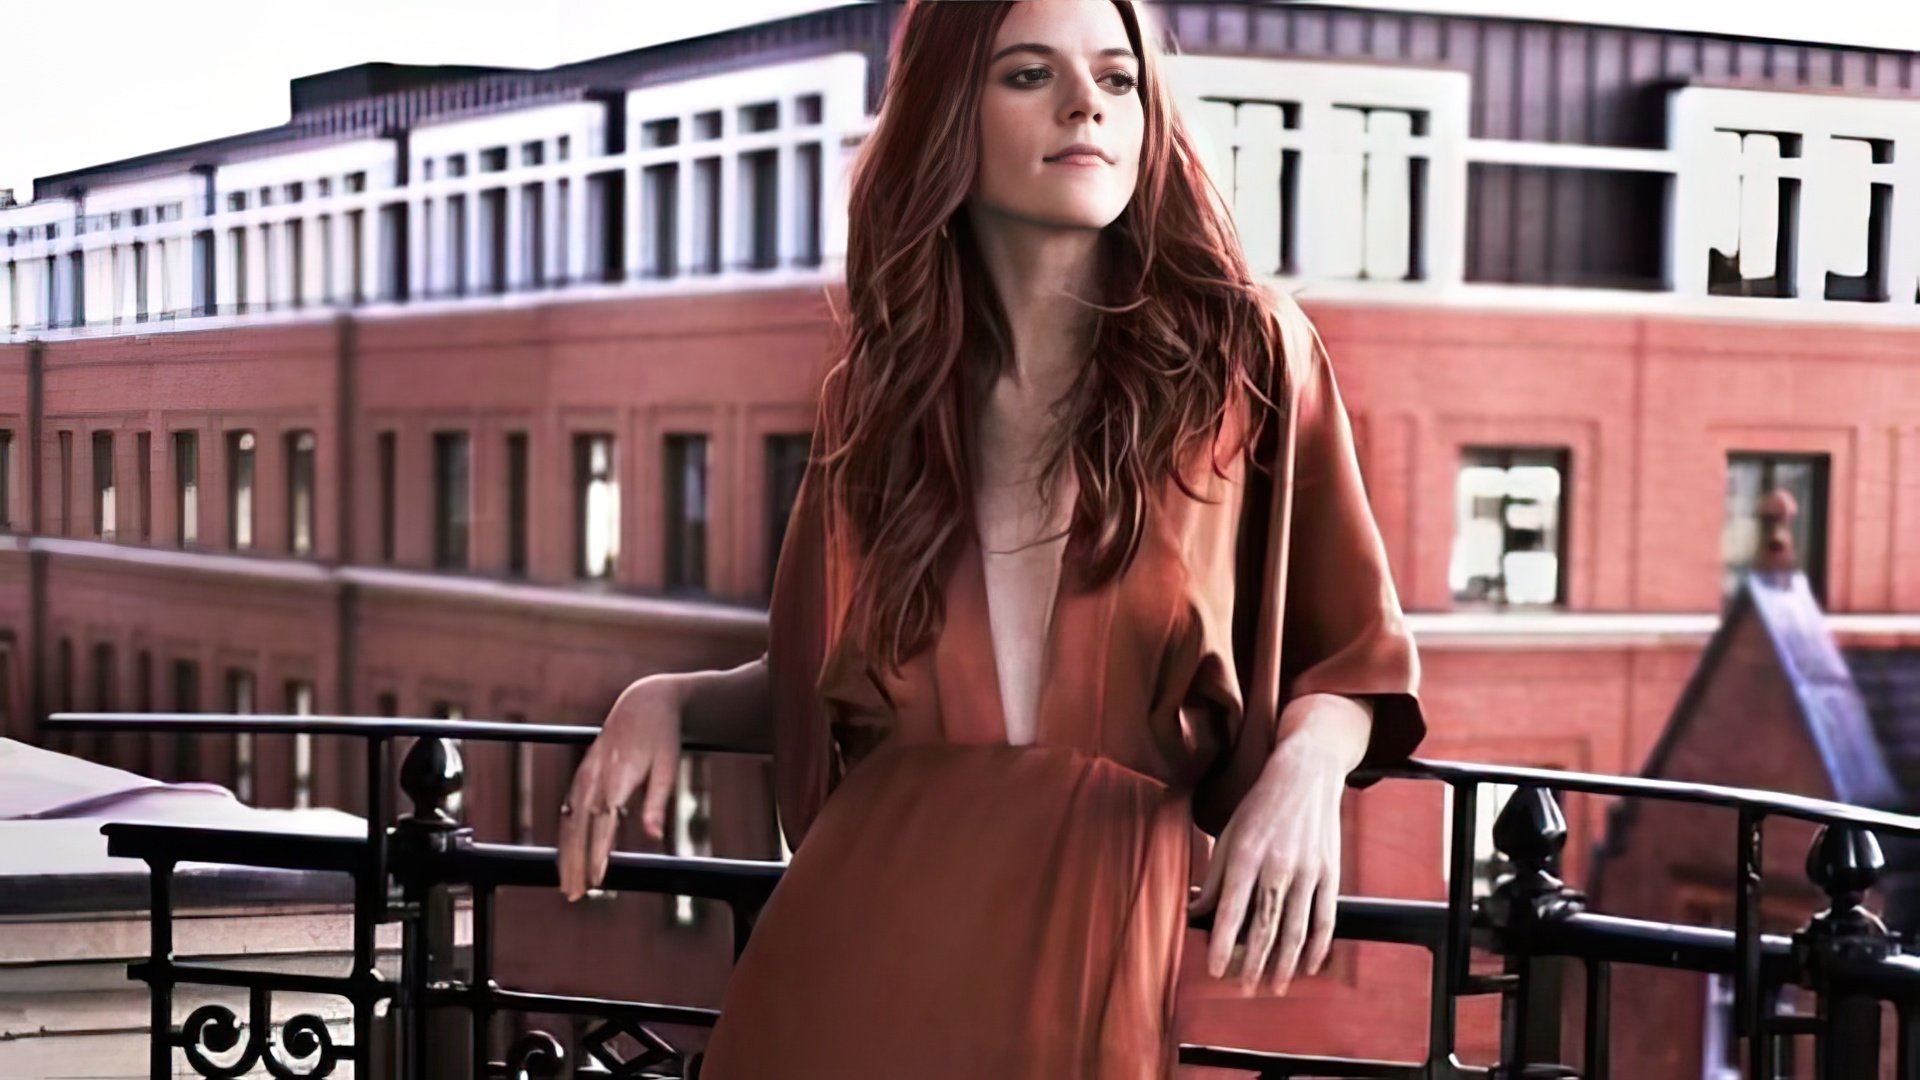 Rose Leslie graduated from the London Academy of Music and Dramatic Art